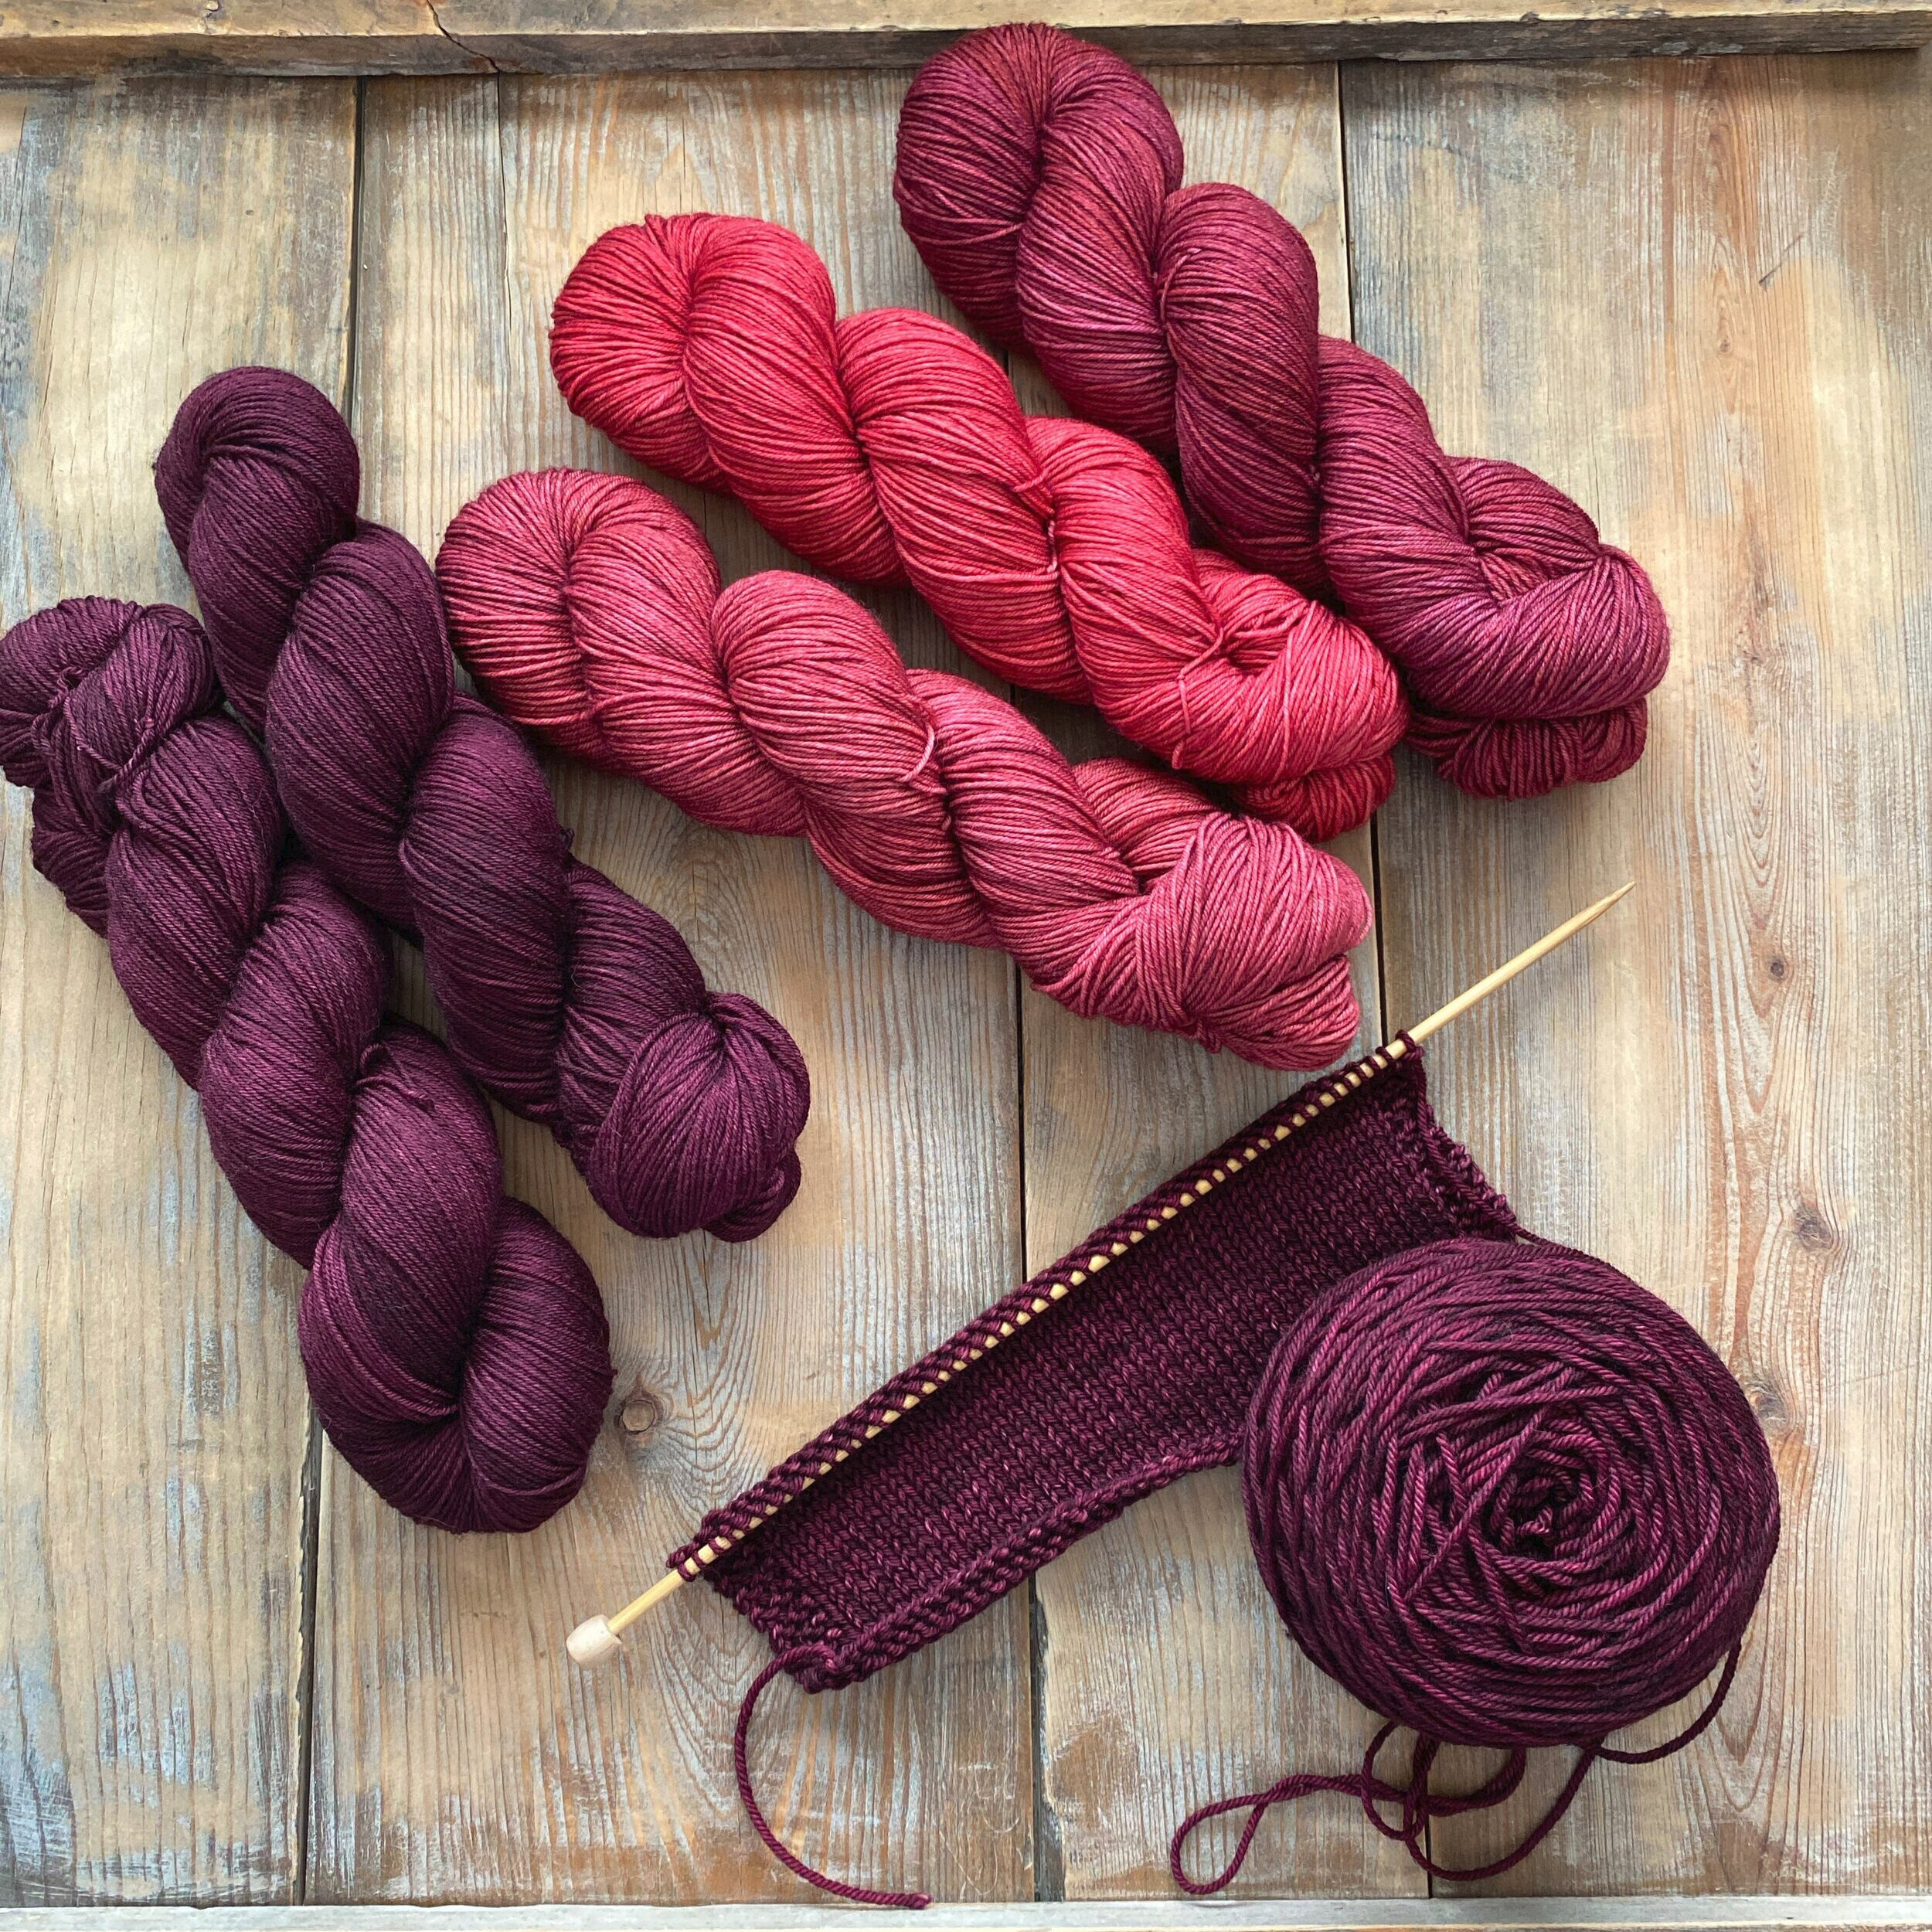 Five skeins of pink and maroon yarn over a cake of maroon yarn on knitting needles.